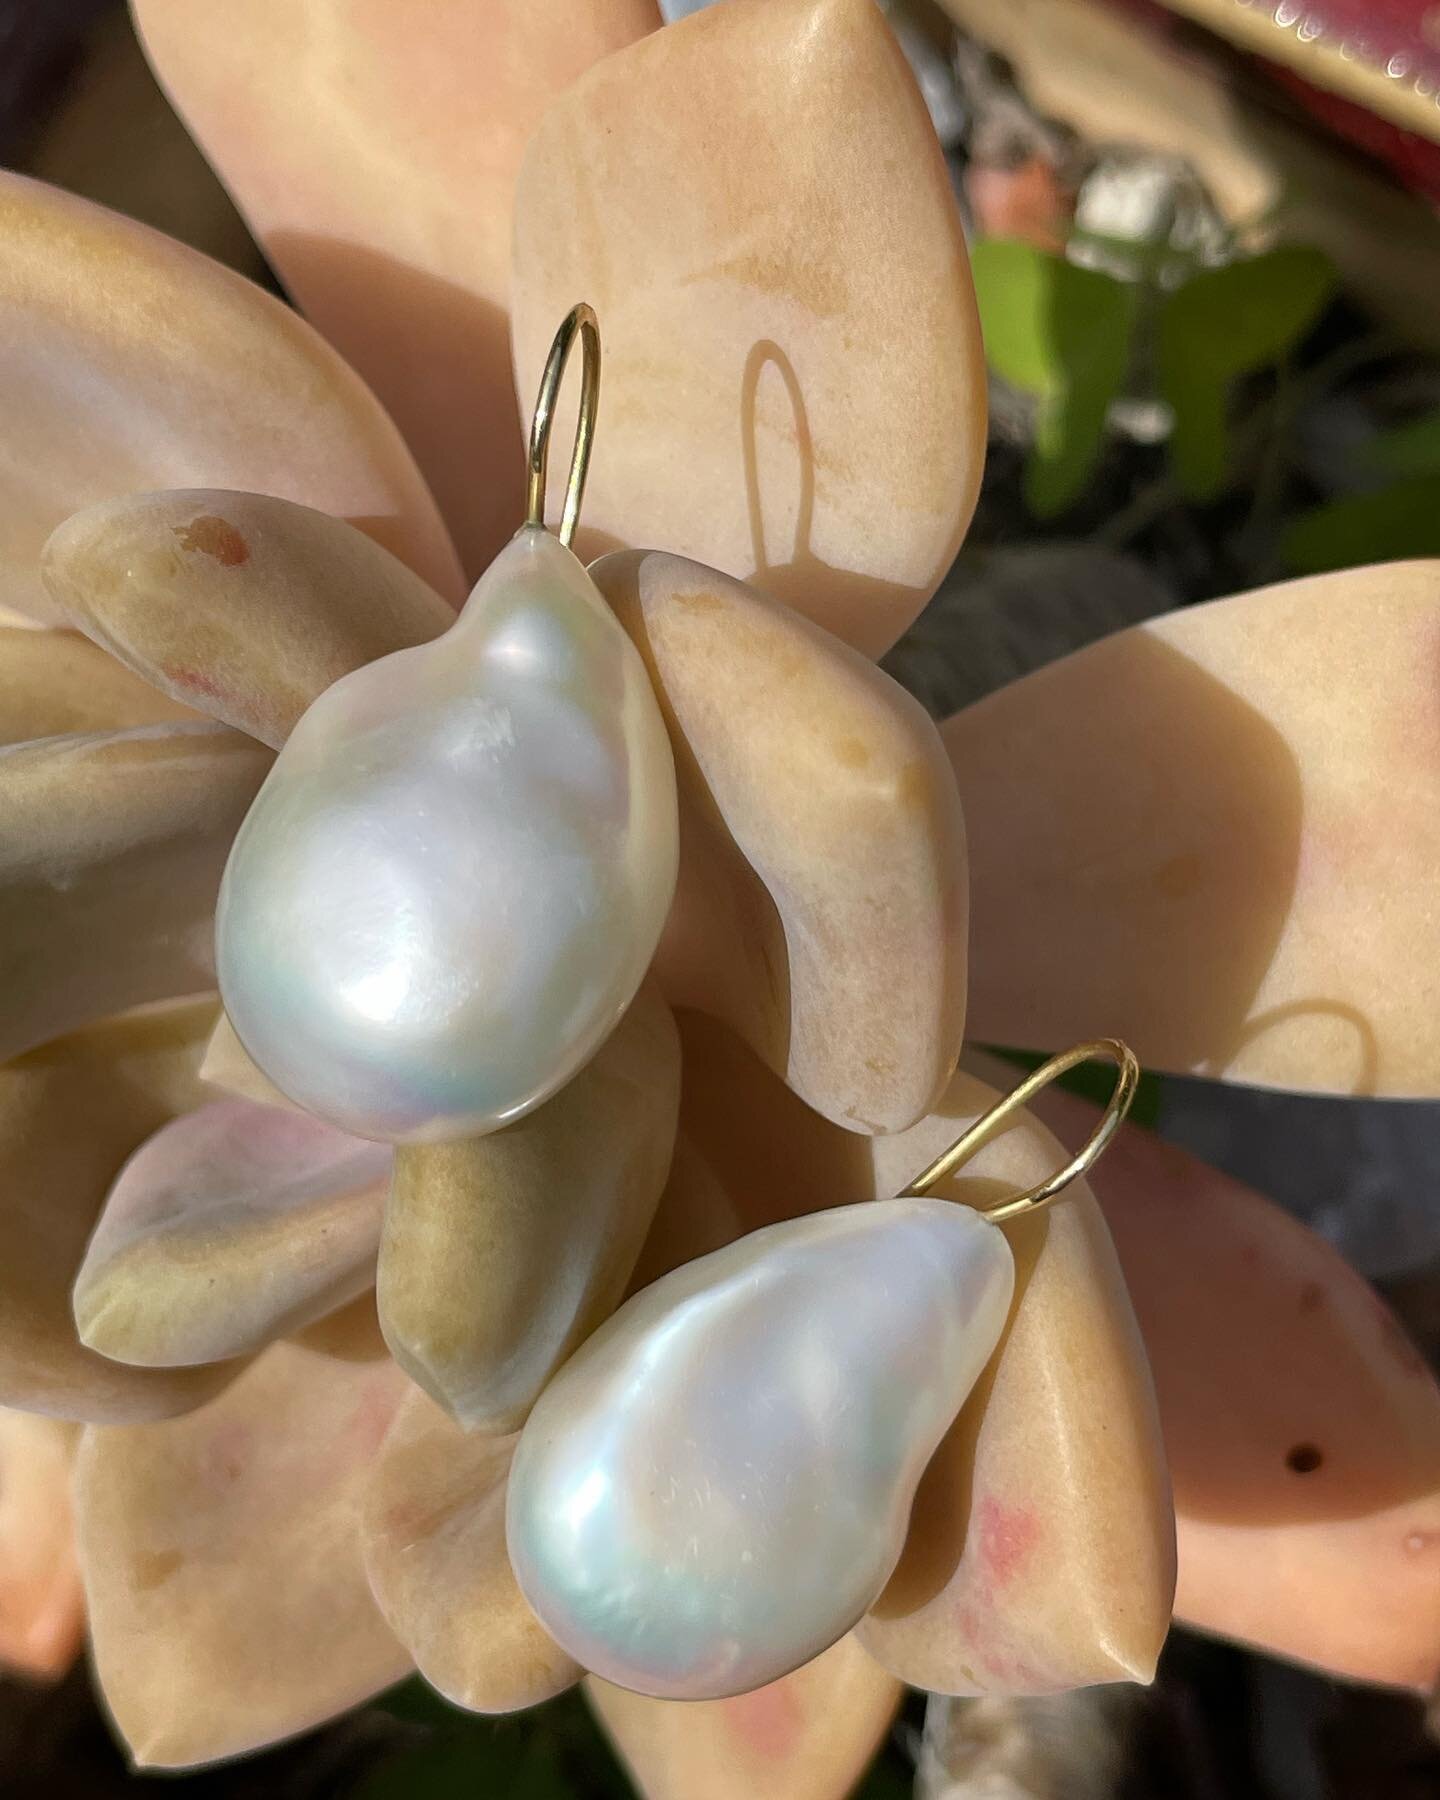 Succulent pearls and other things blooming at Fibula